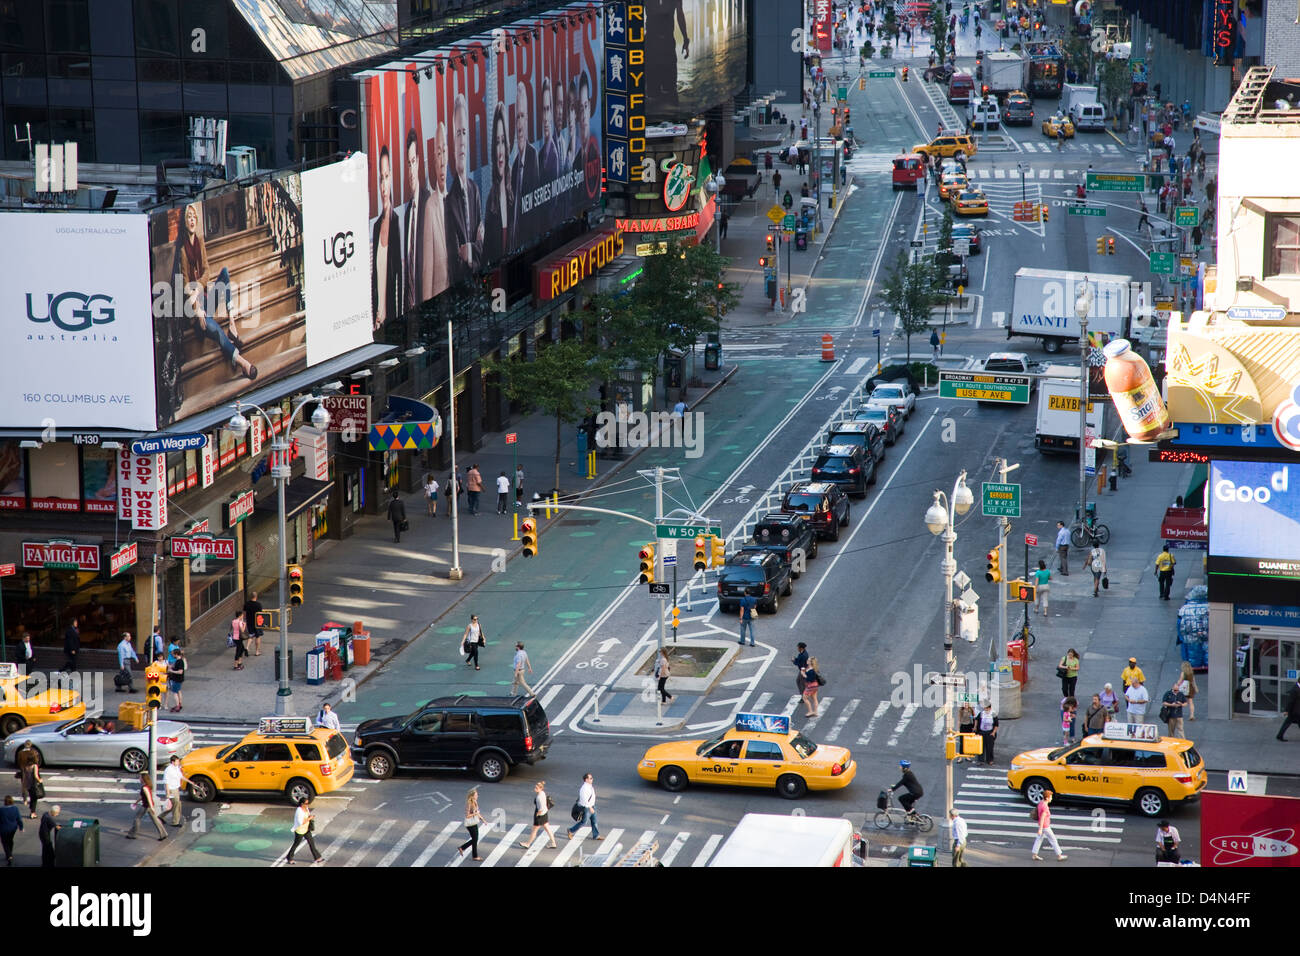 Time Square during rush hour in New York, USA Stock Photo